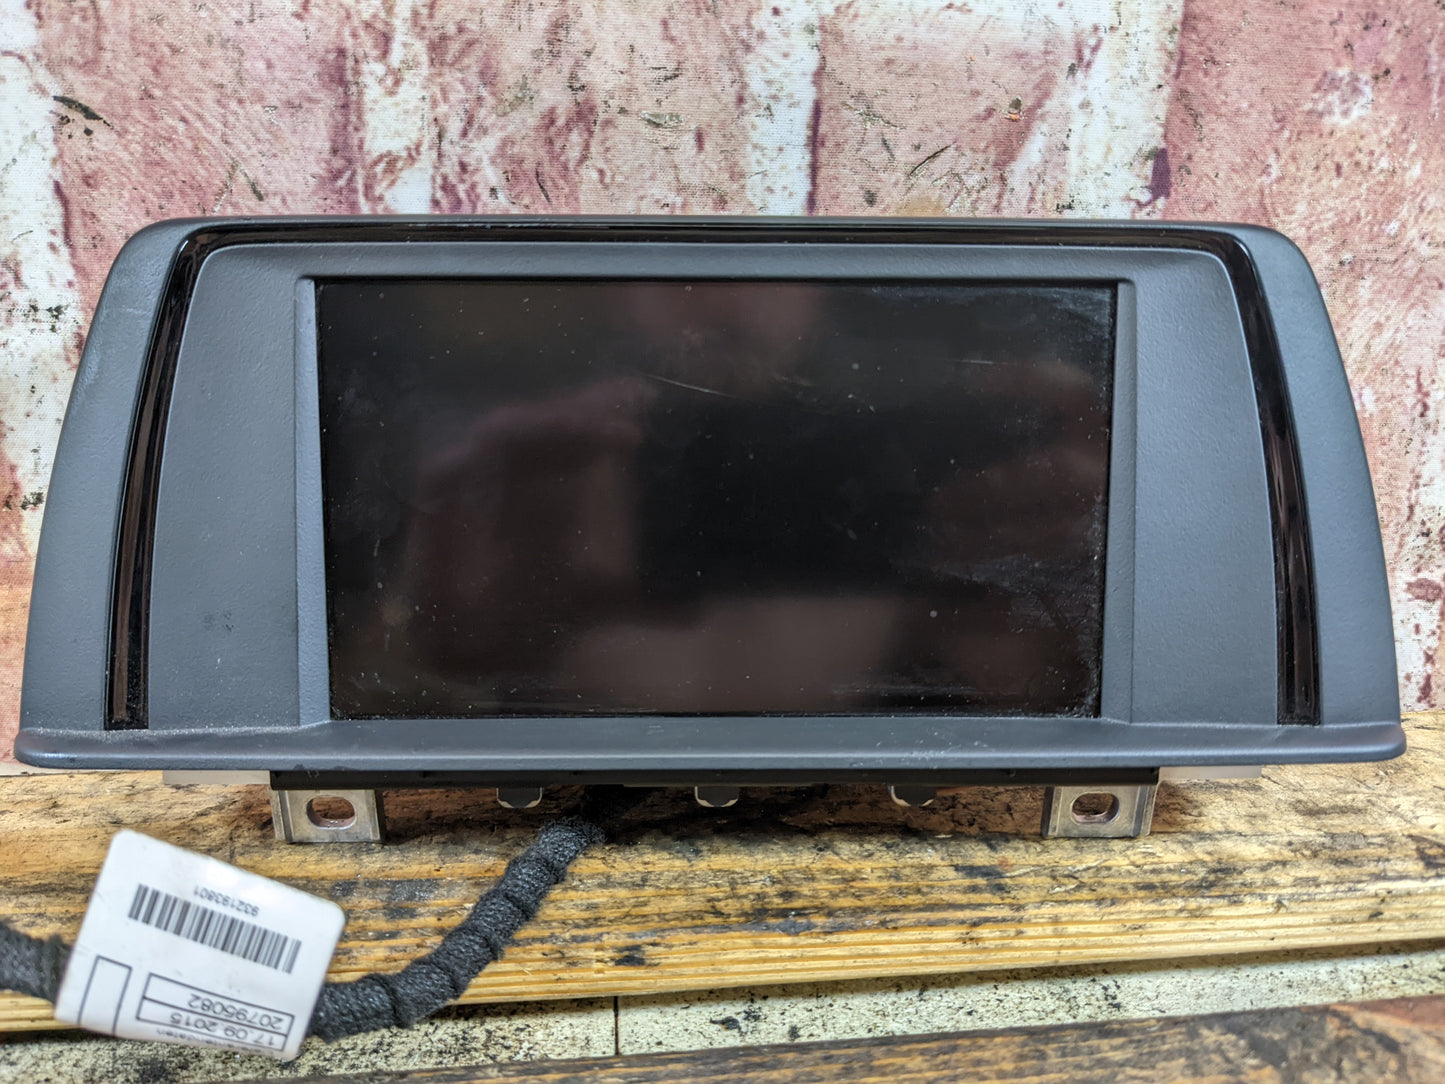 BMW  F22 Central Information Display Screen 6.5"